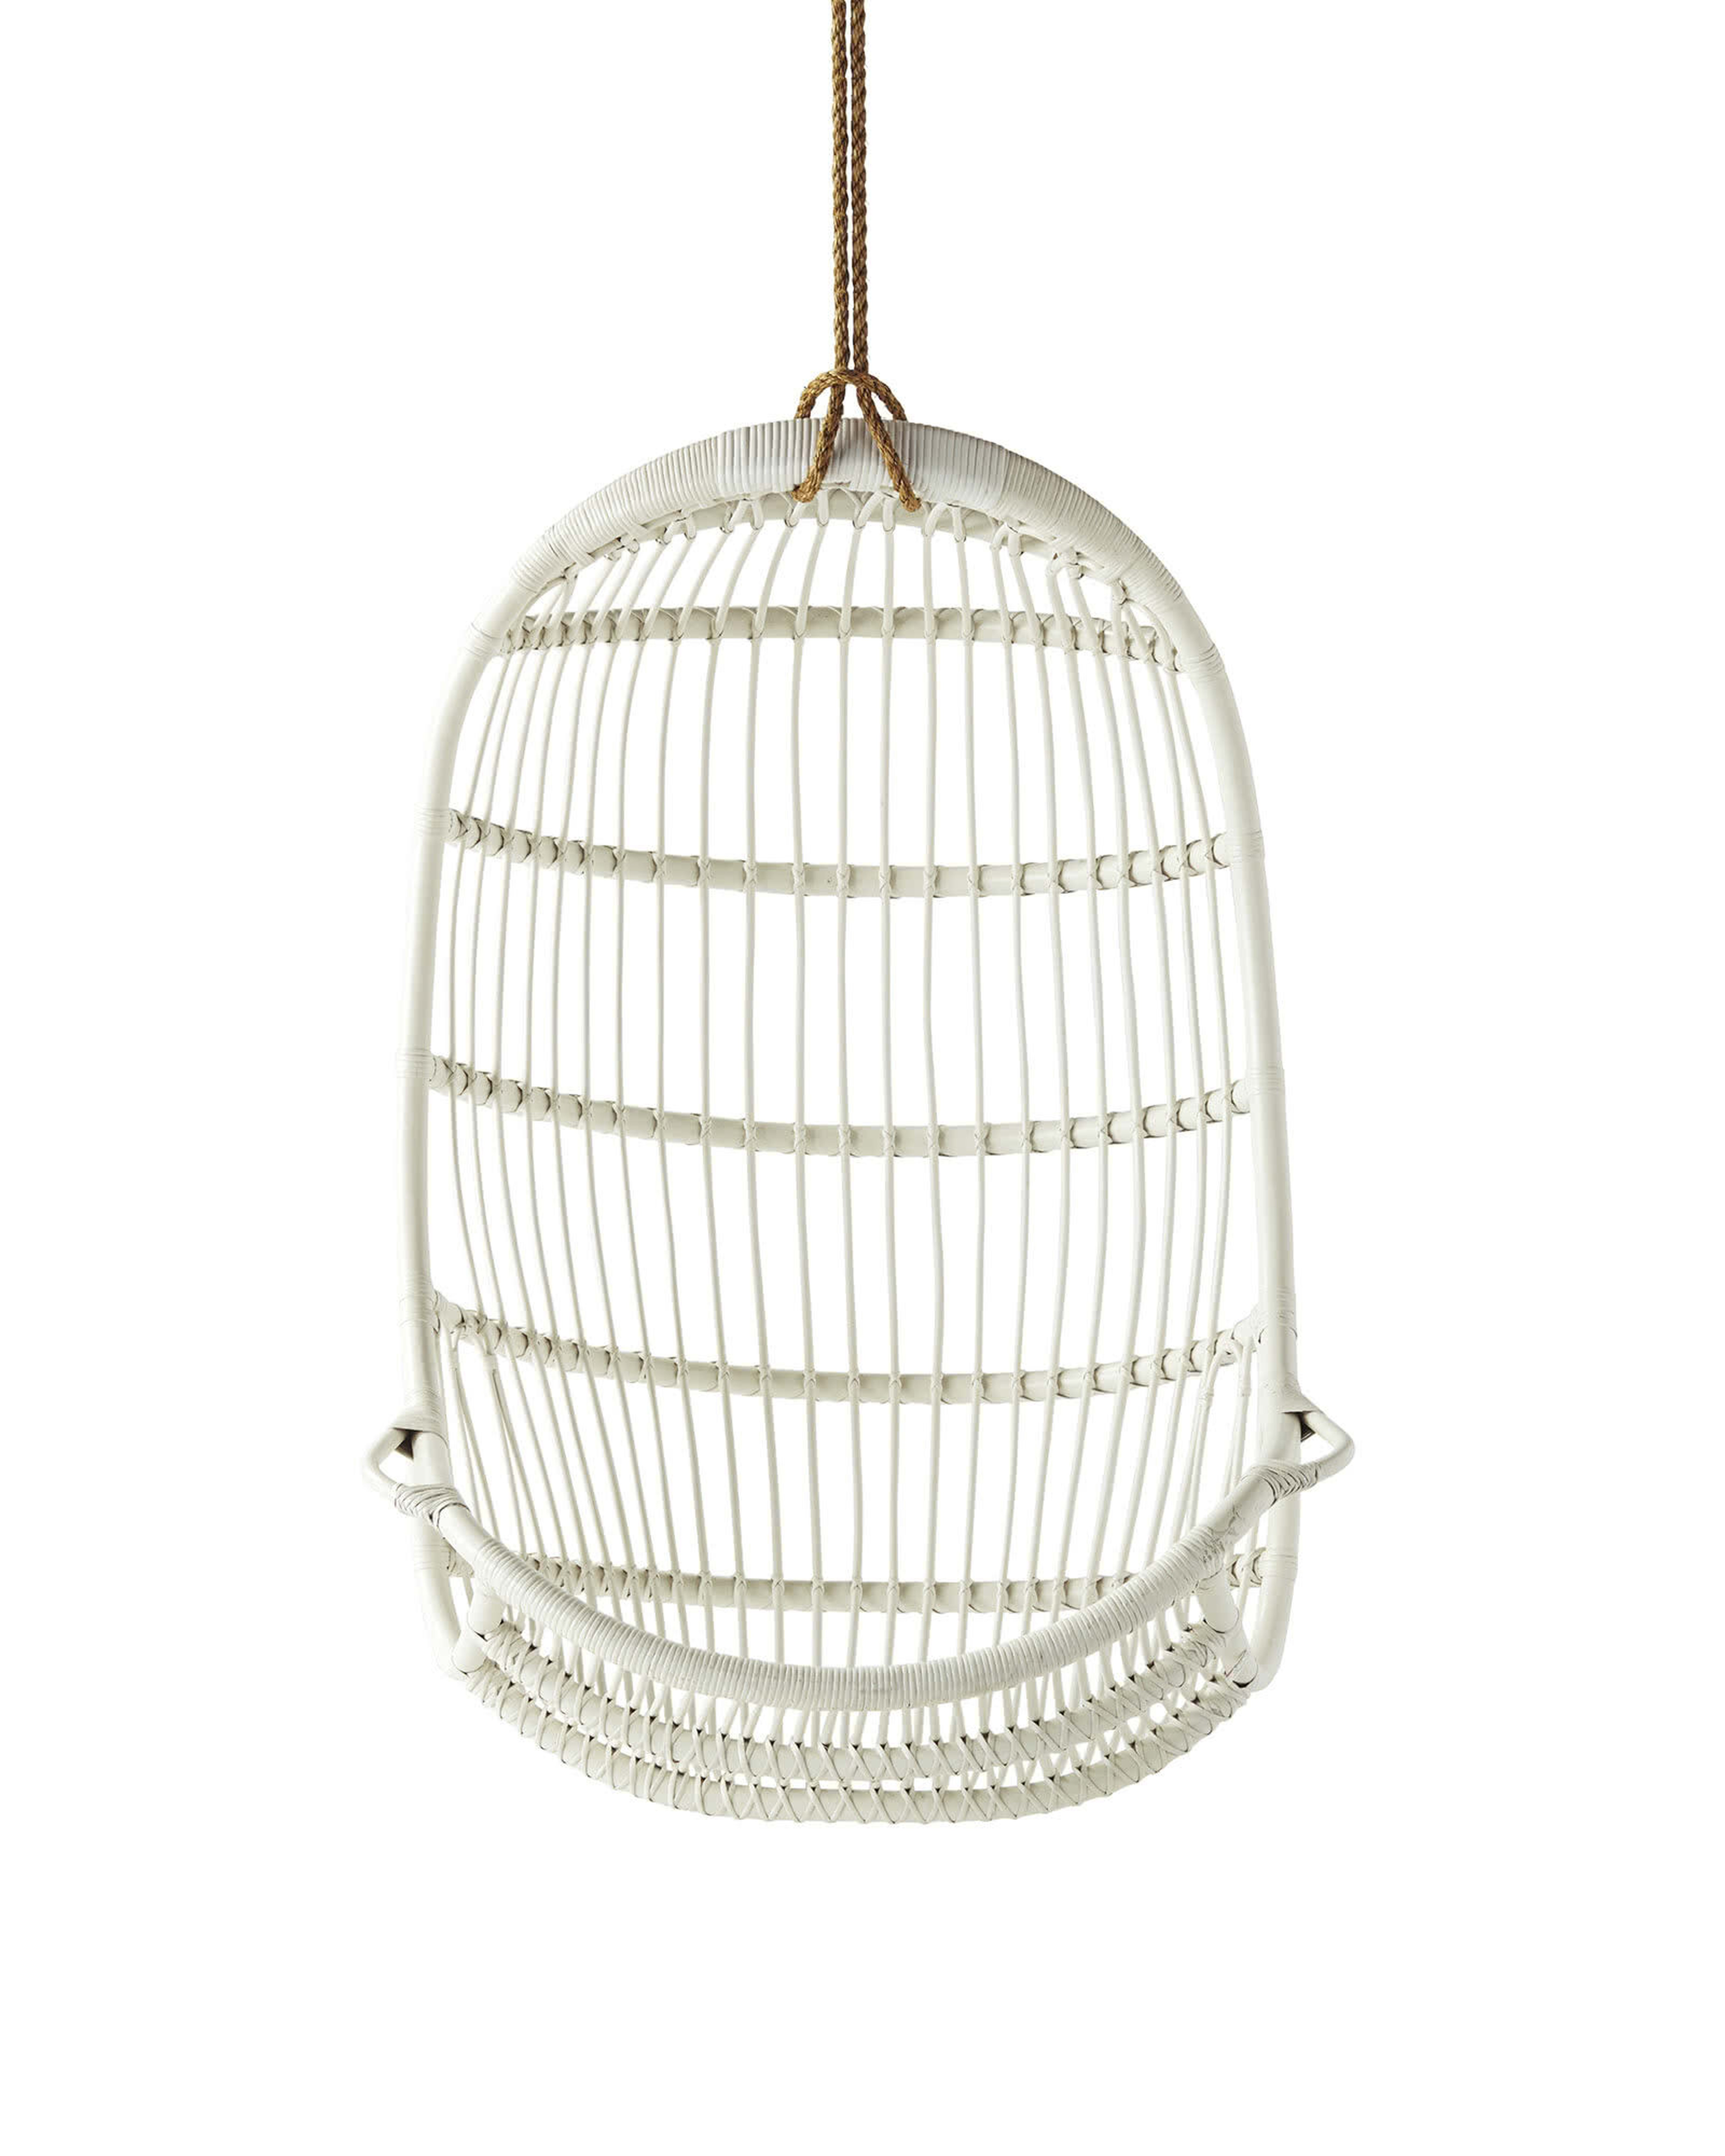 Hanging Rattan Chair - Serena and Lily